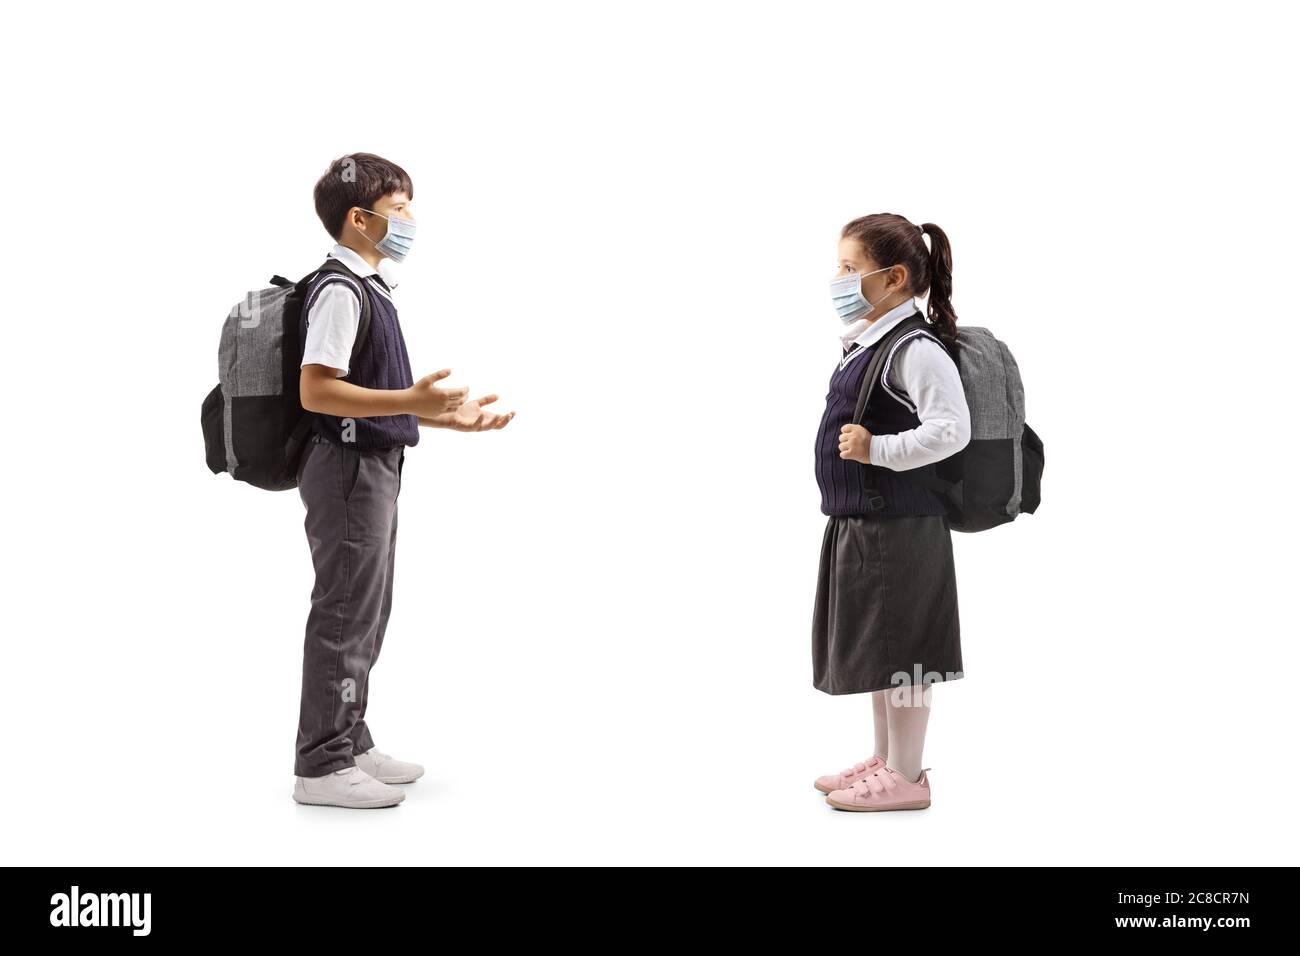 Full length profile shot of a schoolboy talking to a schoolgirl with protective face masks isolated on white background Stock Photo